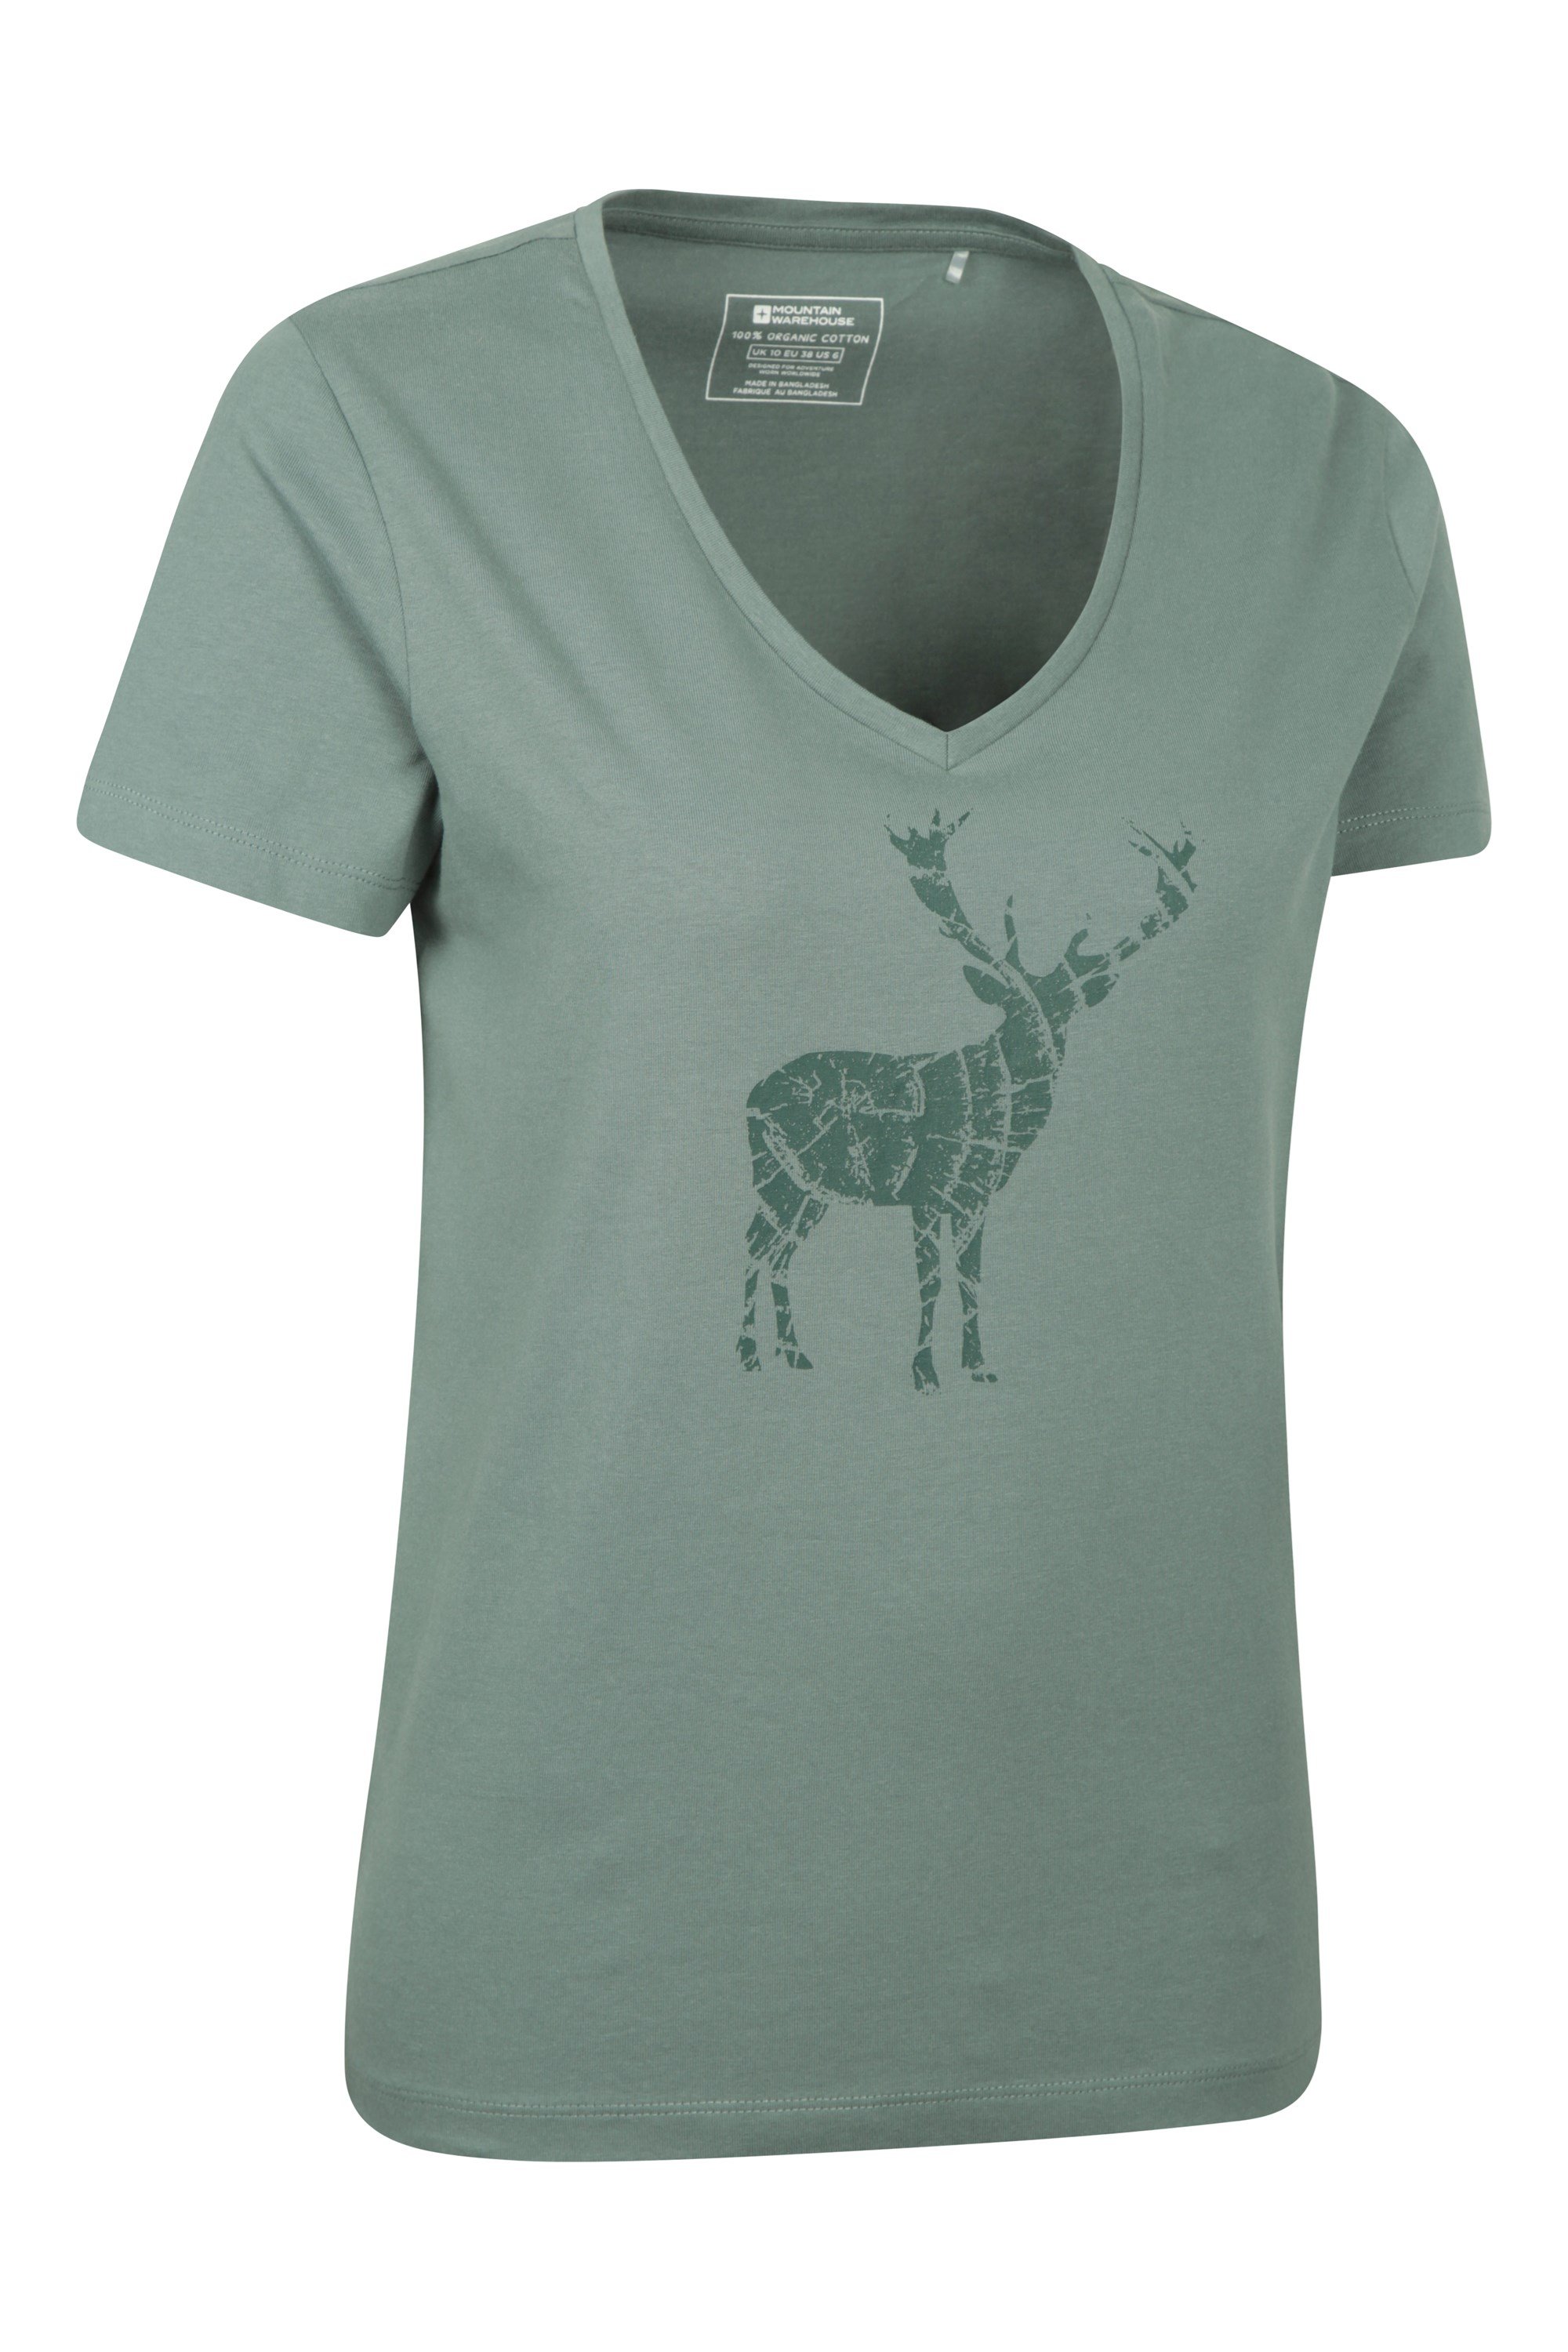 Stag Womens Loose Fit Organic T-Shirt